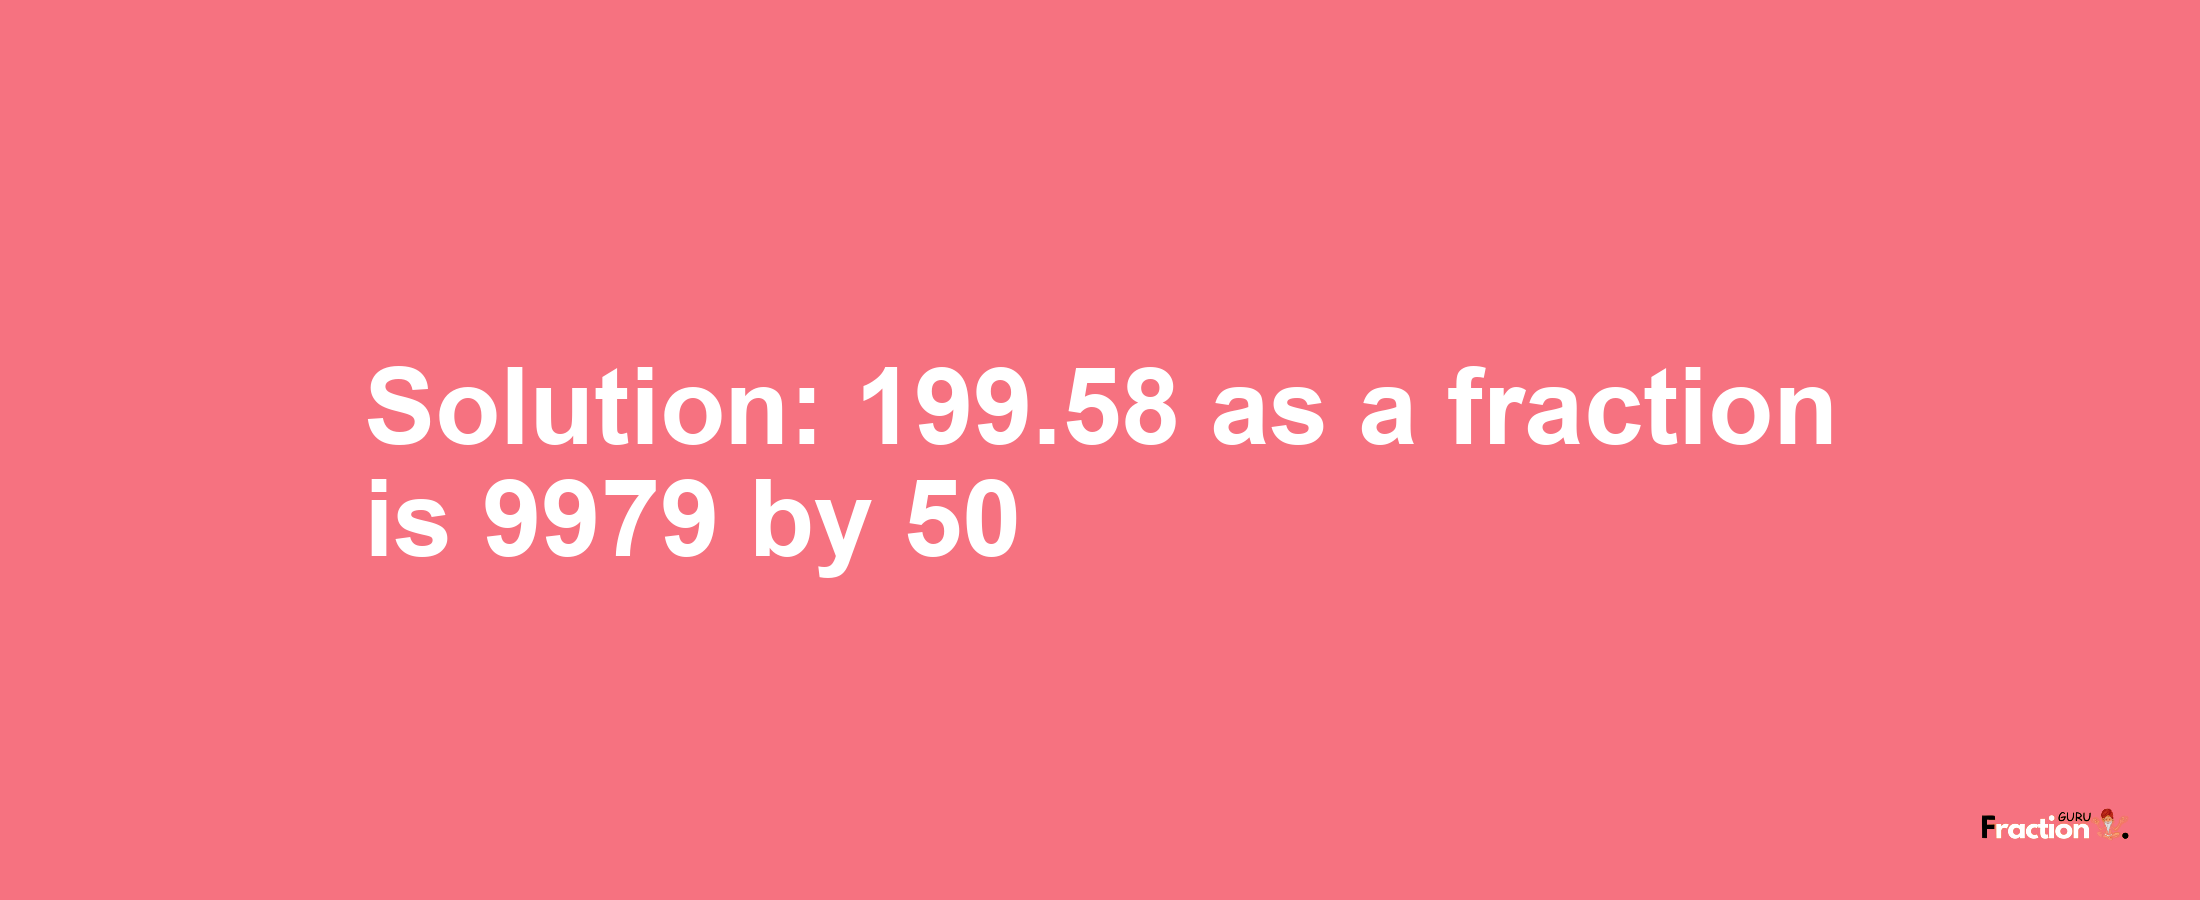 Solution:199.58 as a fraction is 9979/50